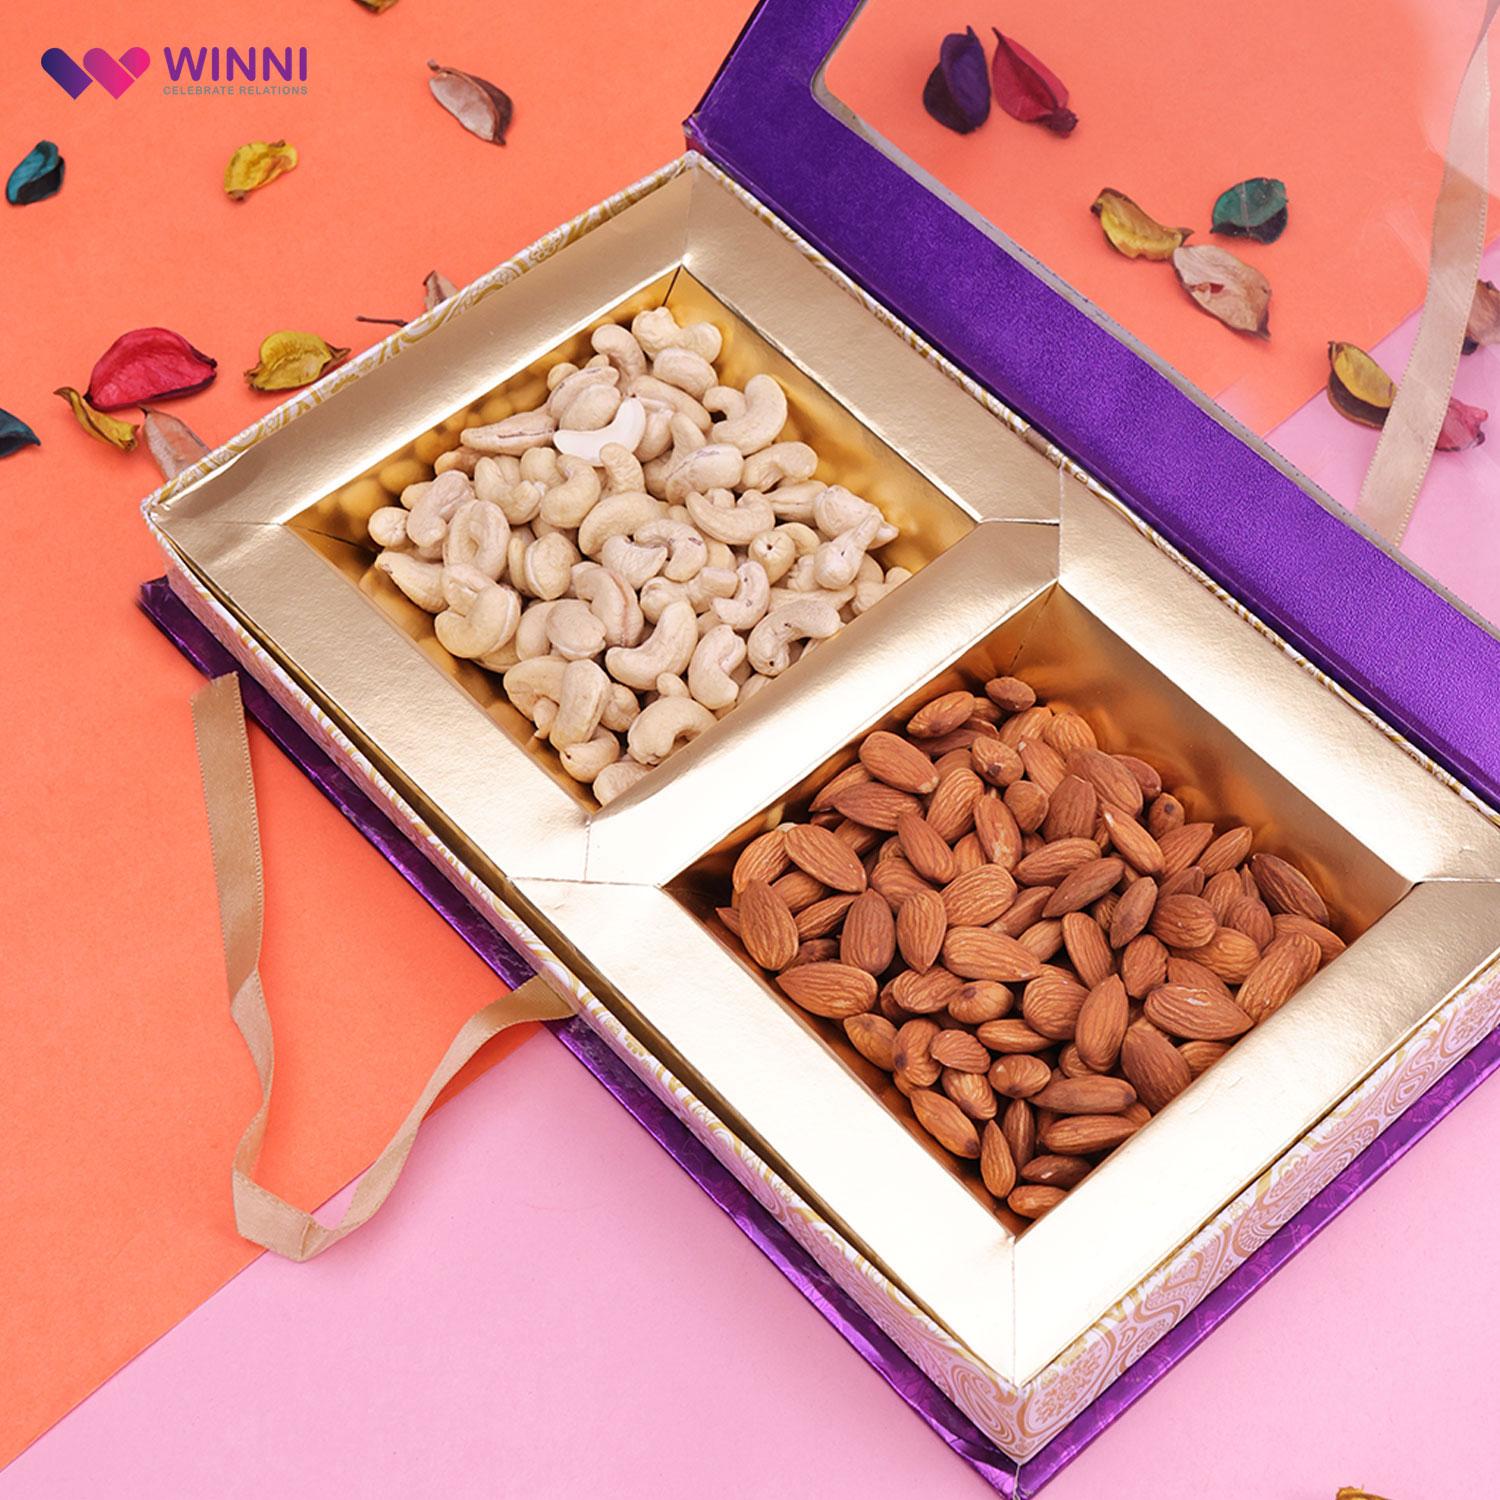 Giftbox Wholesale Dealers Suppliers Manufacturers in Chennai | Tamilnadu |  Diwali | Pongal | New Year | Marriage Gift suppliers